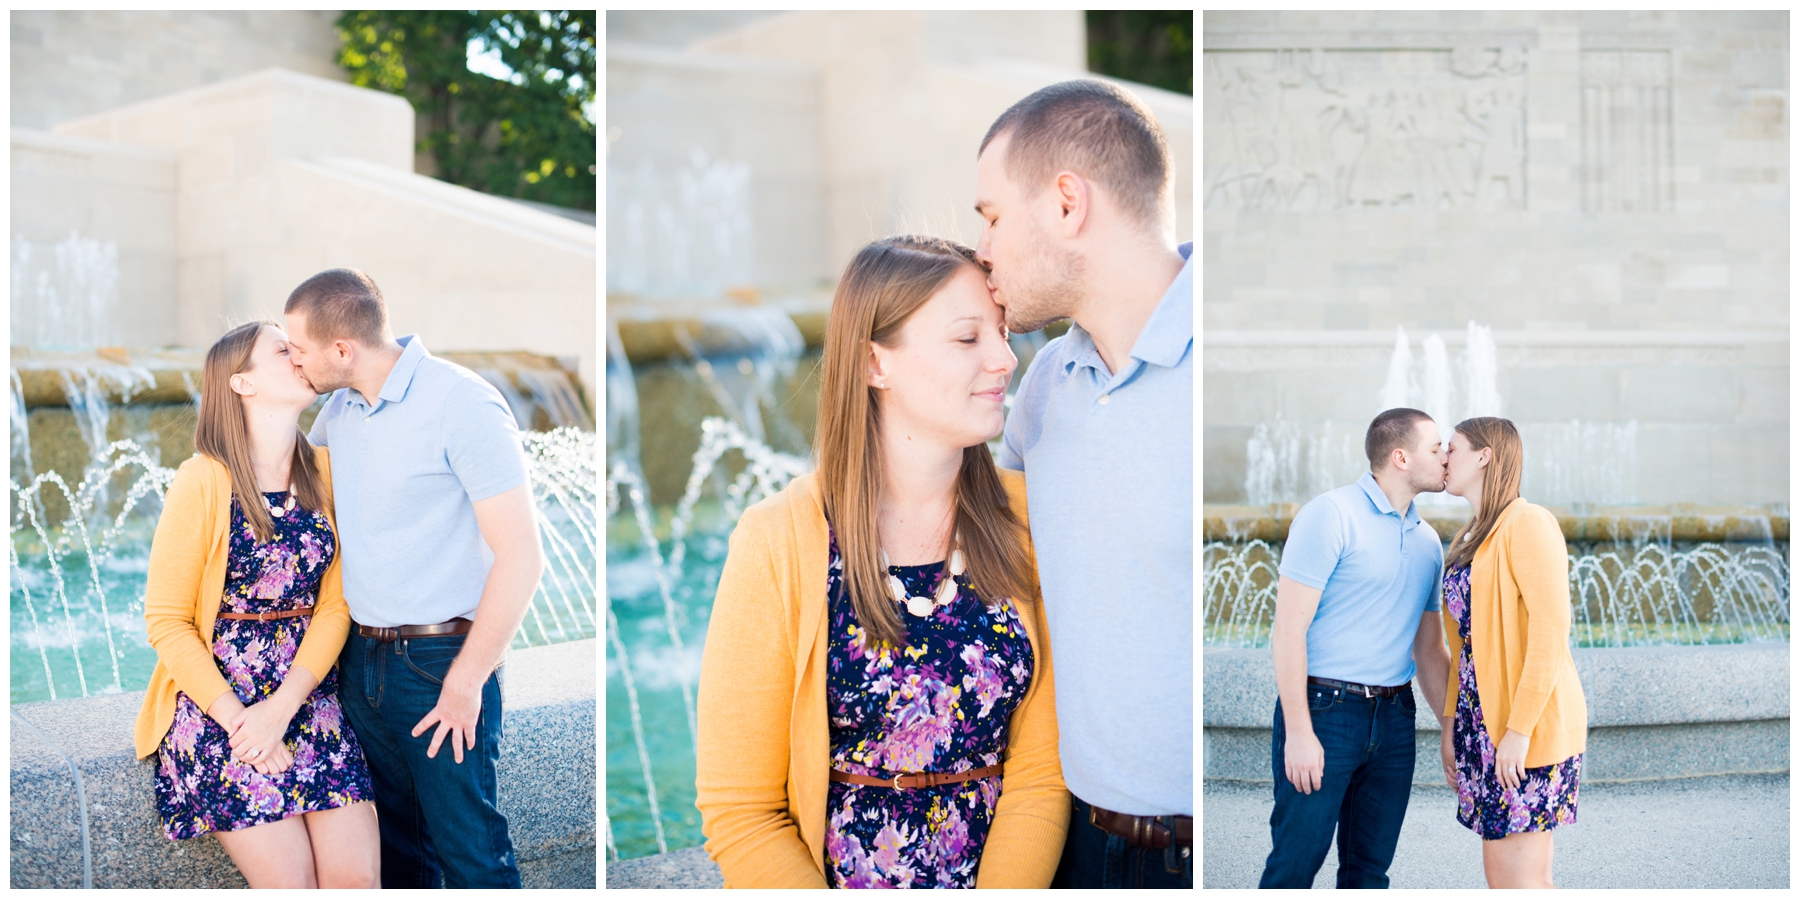 Engagement pictures downtown Kansas City at Liberty Memorial with floral dress and mustard yellow cardigan, fountains and tiled walls with city scape by photographer Lacey Rene Studios by photographer Lacey Rene Studios